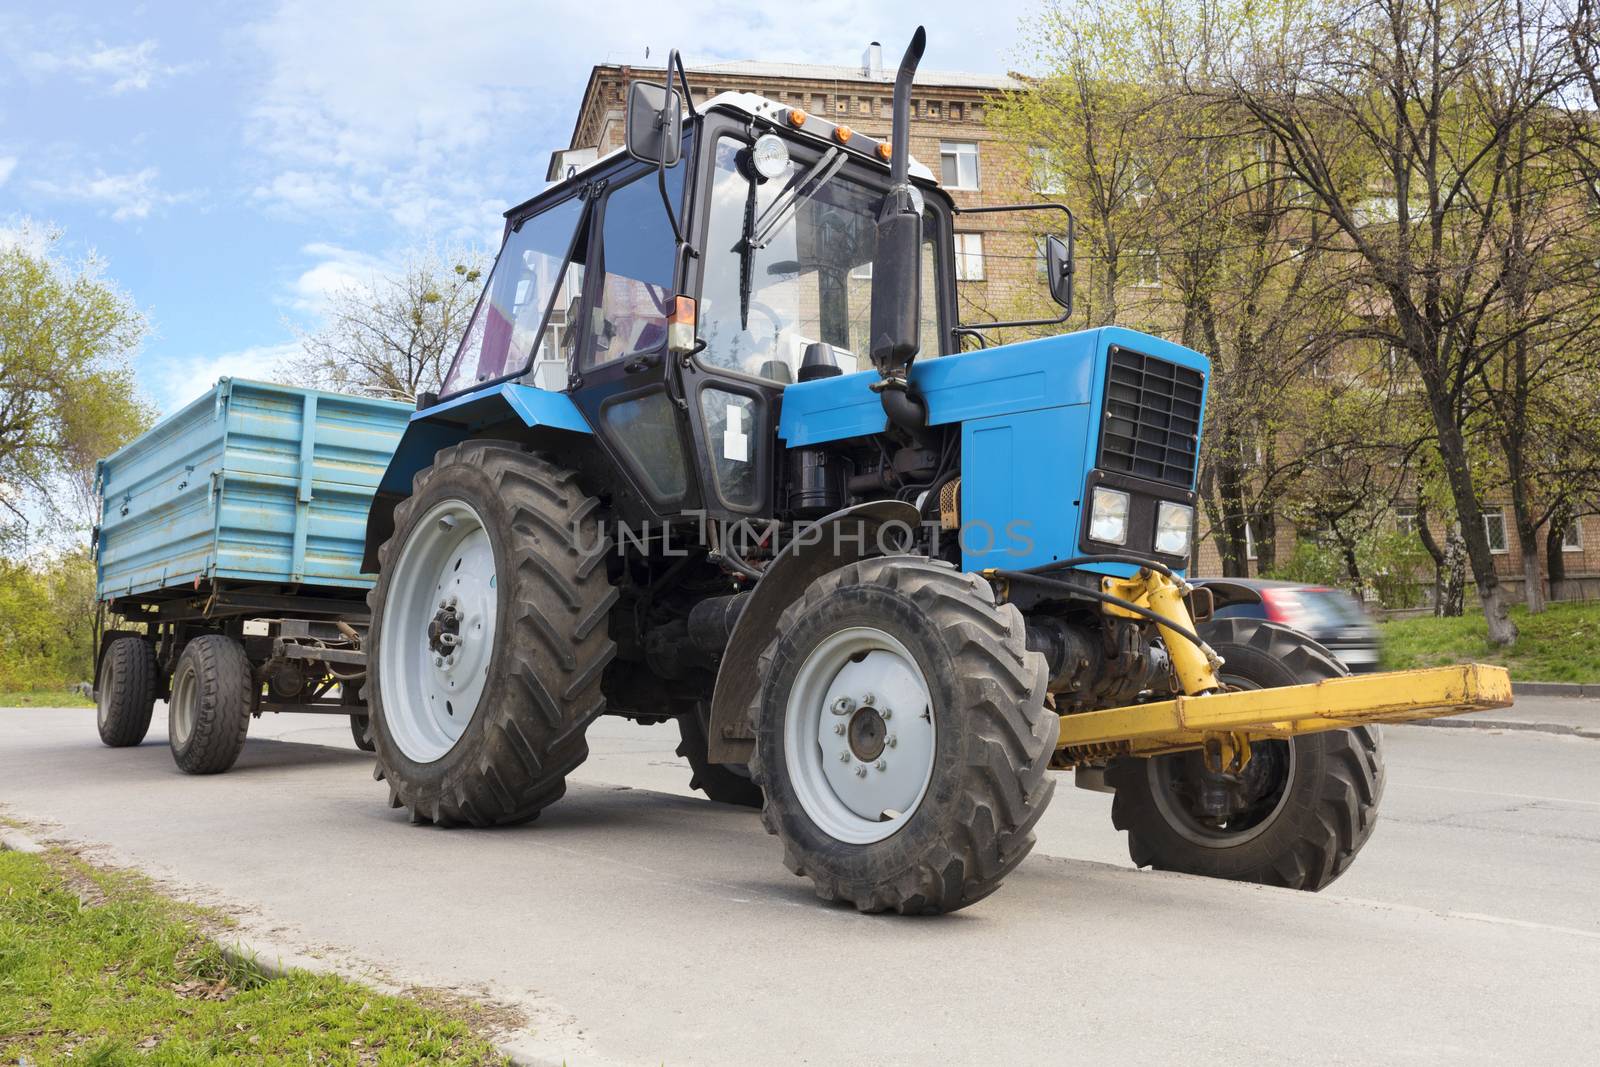 An old small blue tractor with a trailer stands on the edge of a city street road